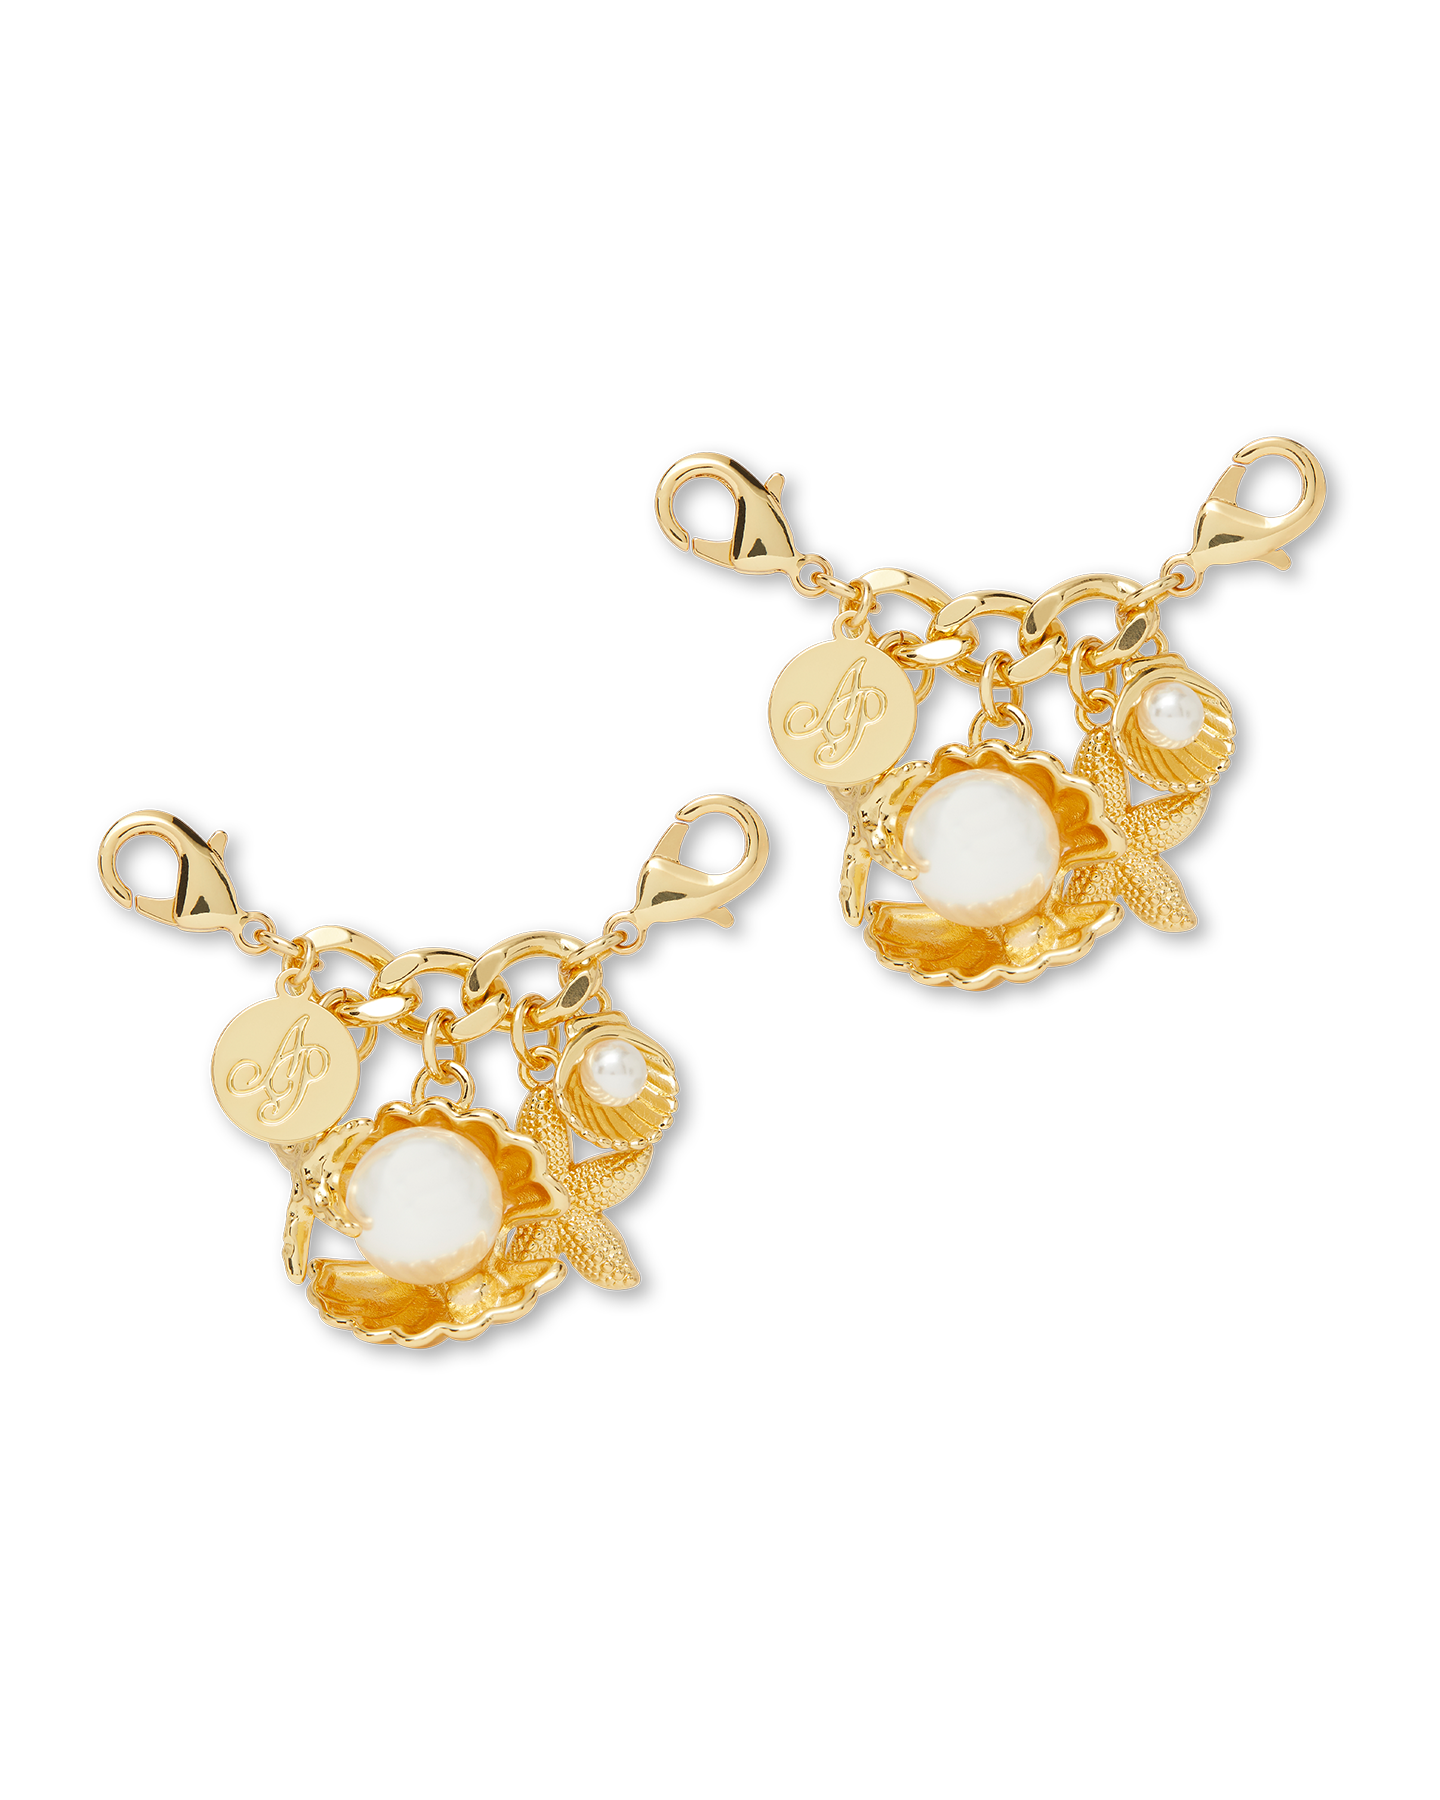 Seashell Charms in Gold/Pearl | By Agent Provocateur New In